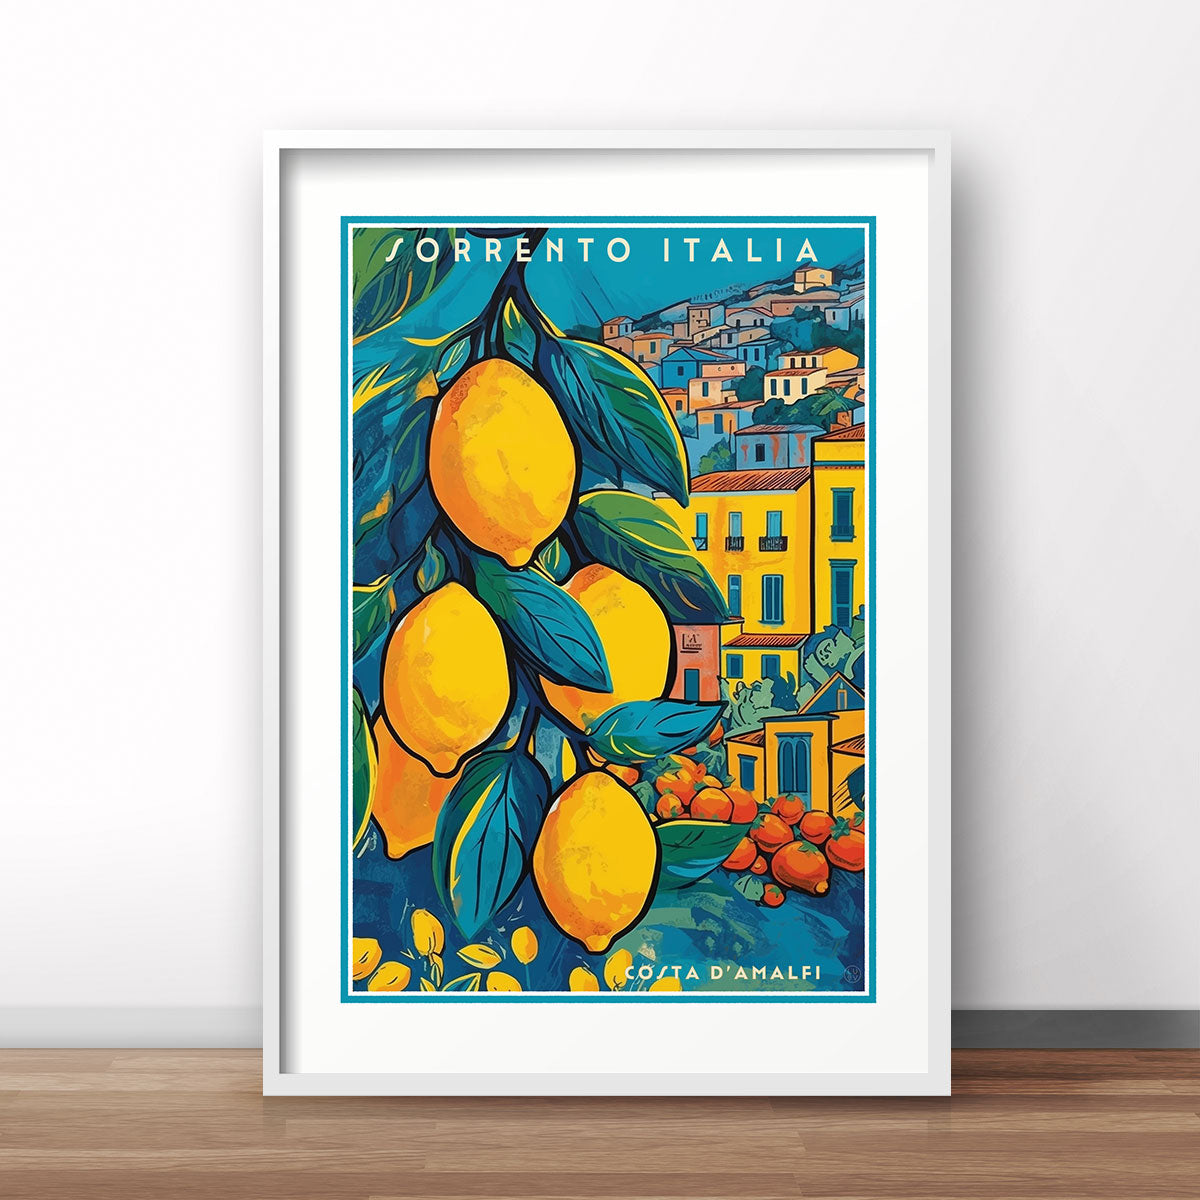 Sorrento Italy retro vintage travel poster print from Places We Luv